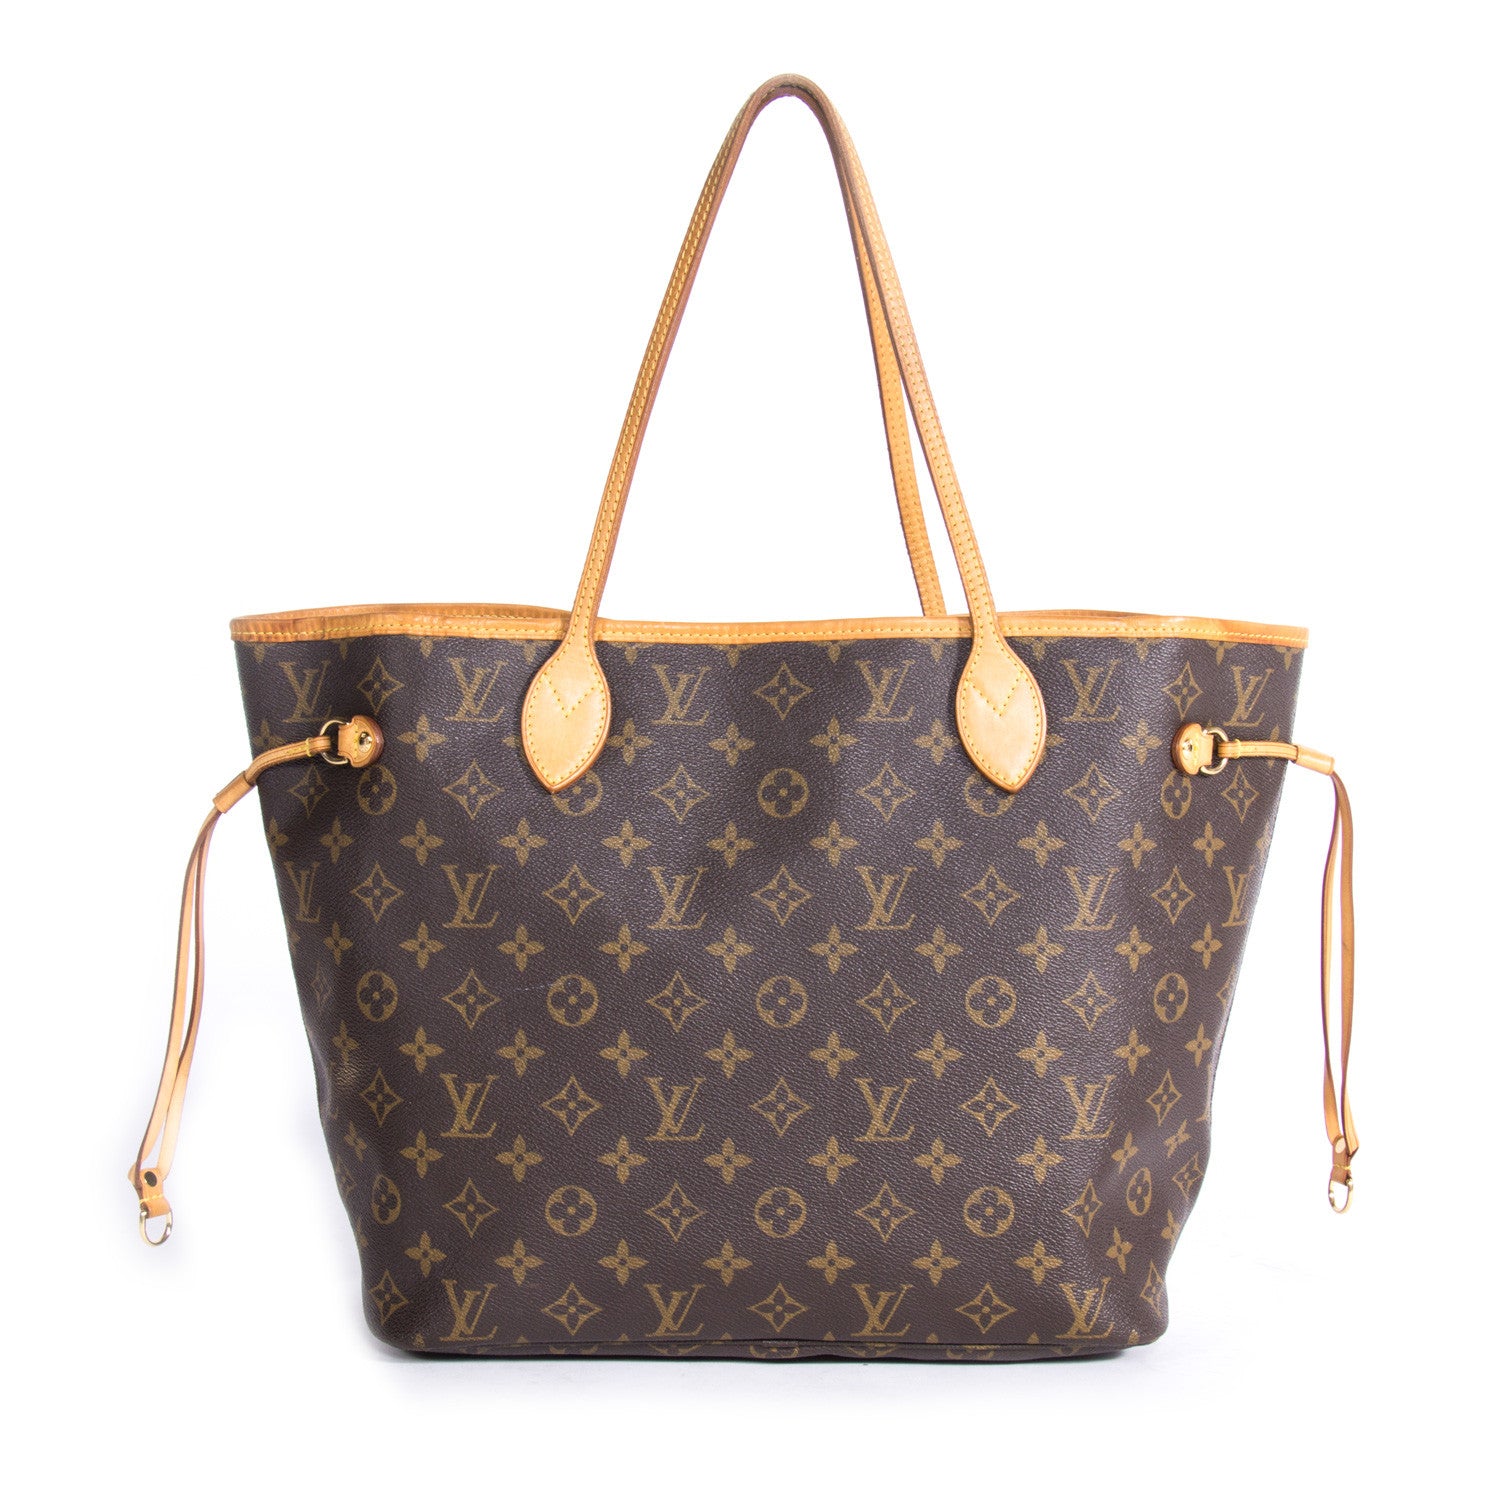 Shop authentic Louis Vuitton Shopping Bag Christian Louboutin at revogue  for just USD 4,900.00